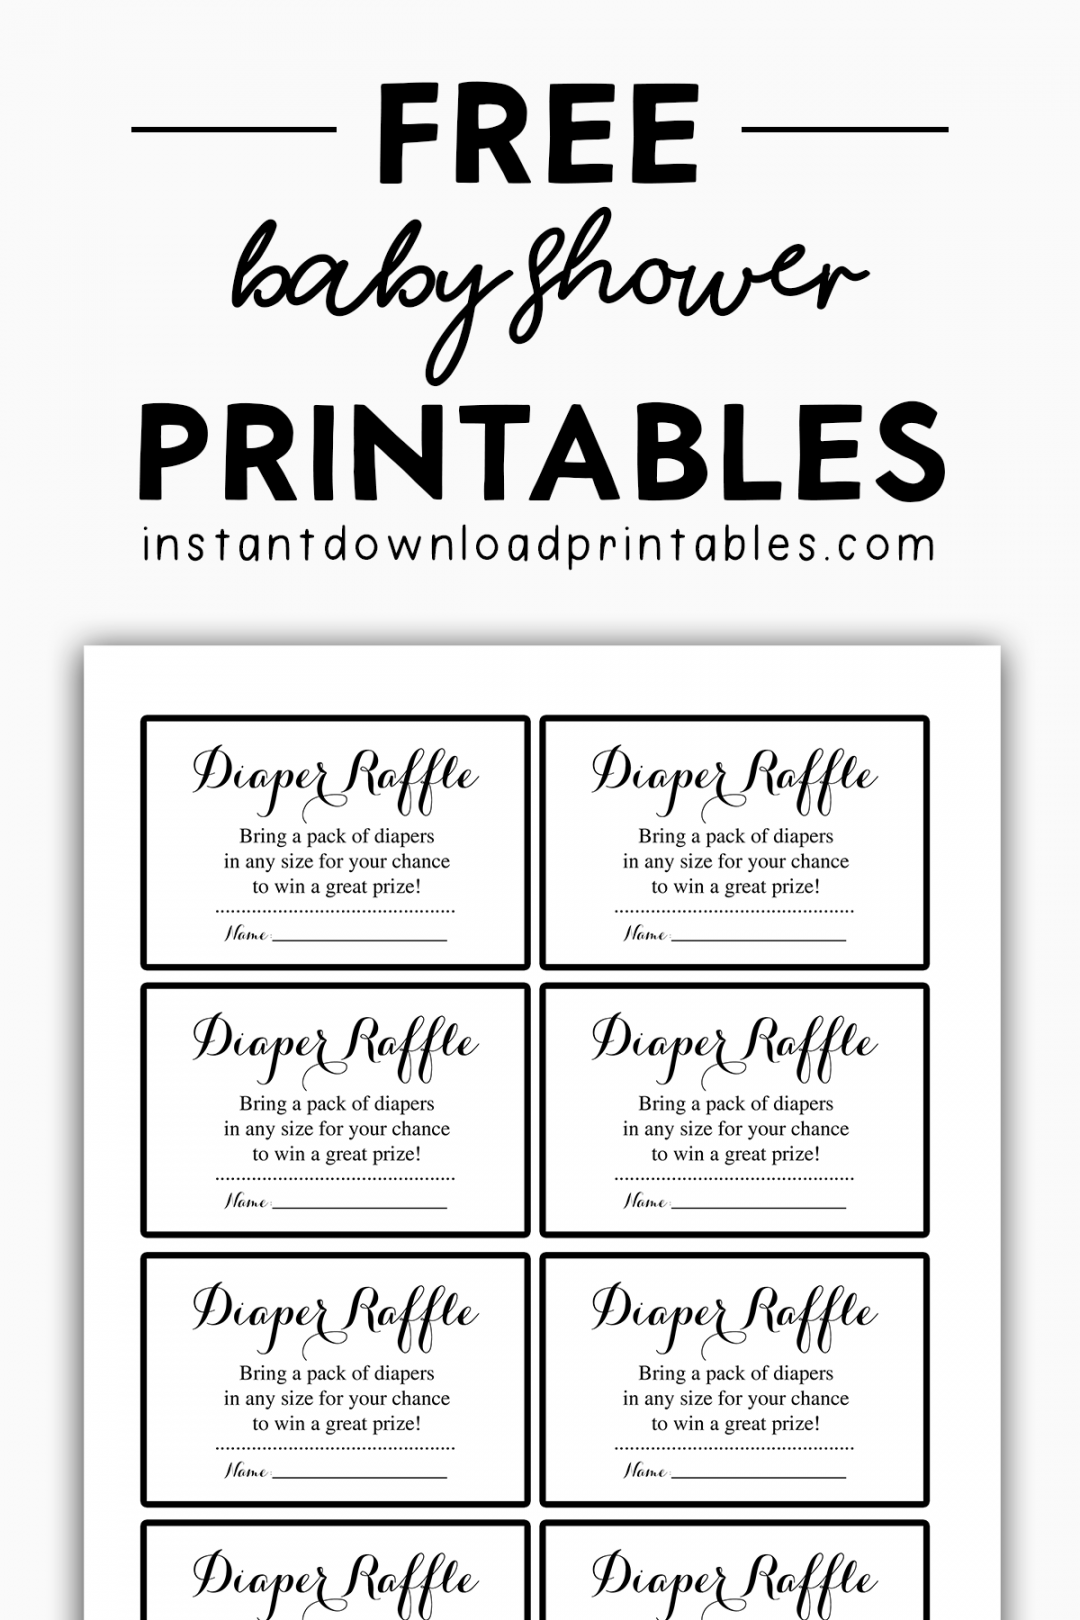 Free Baby Shower Black and White Printables - Instant Download  - FREE Printables - Free Printable Diaper Raffle Tickets